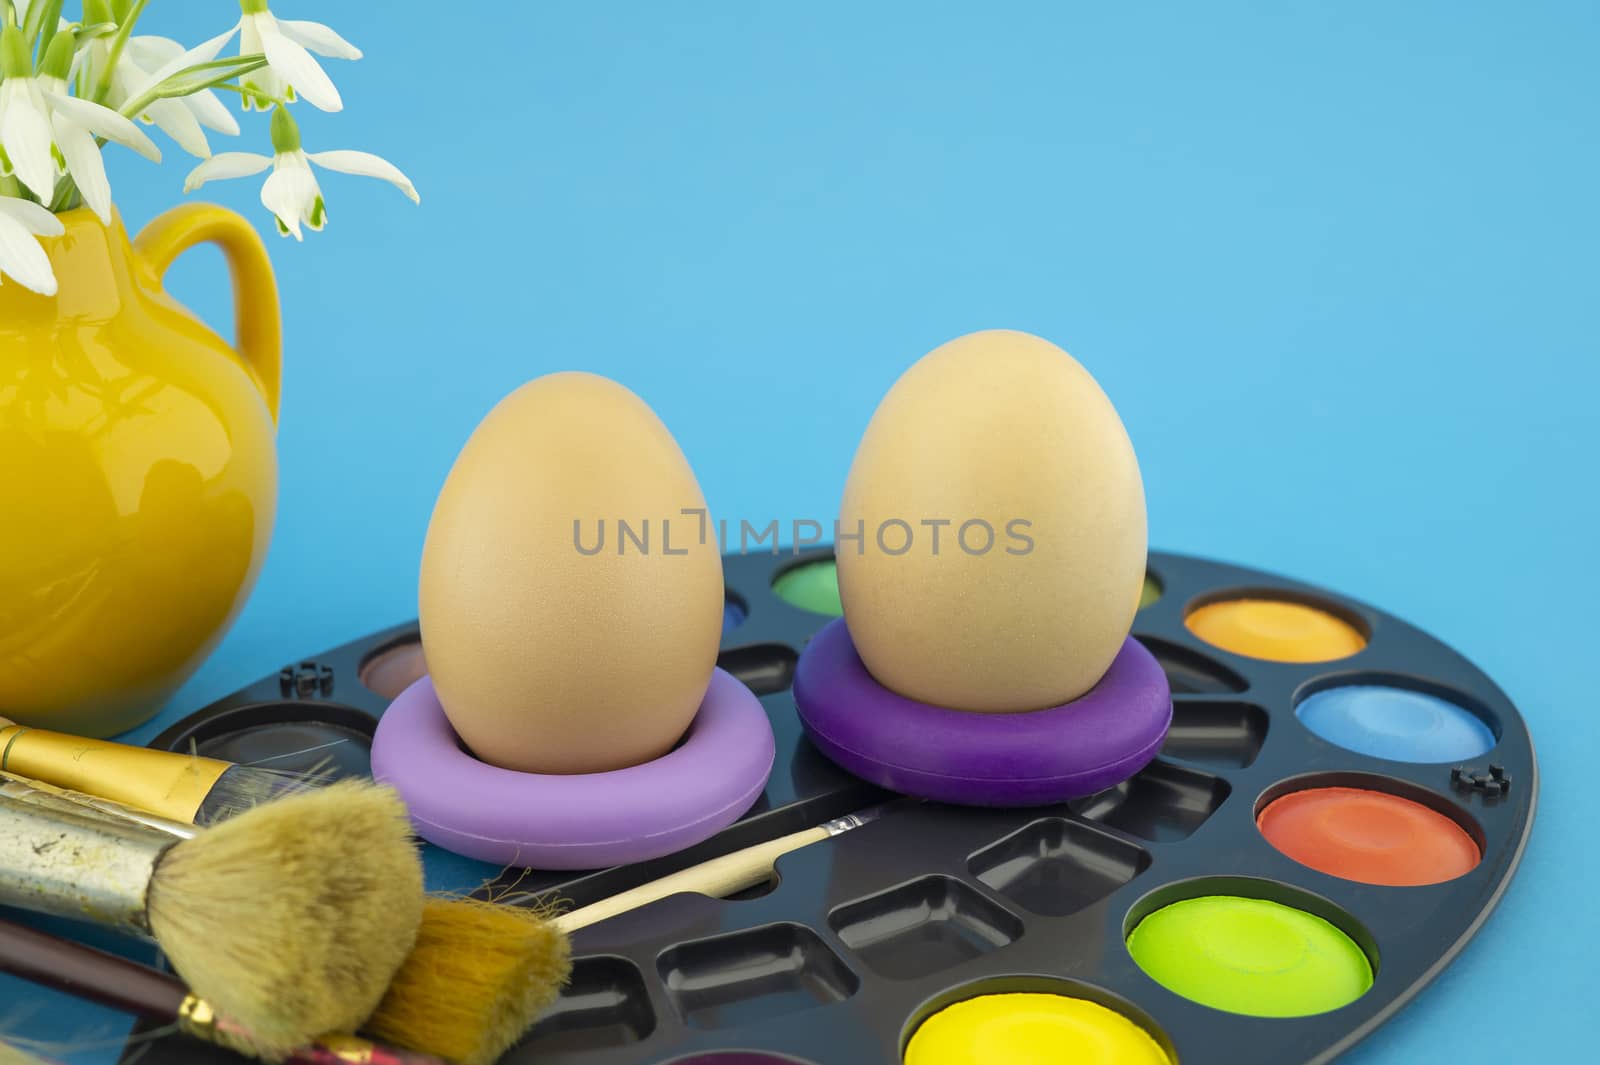 Easter egg decoration concept with paint brushes and set of watercolor paints in pallet, next to a yellow jug with fresh white spring flowers. Studio still life on blue background